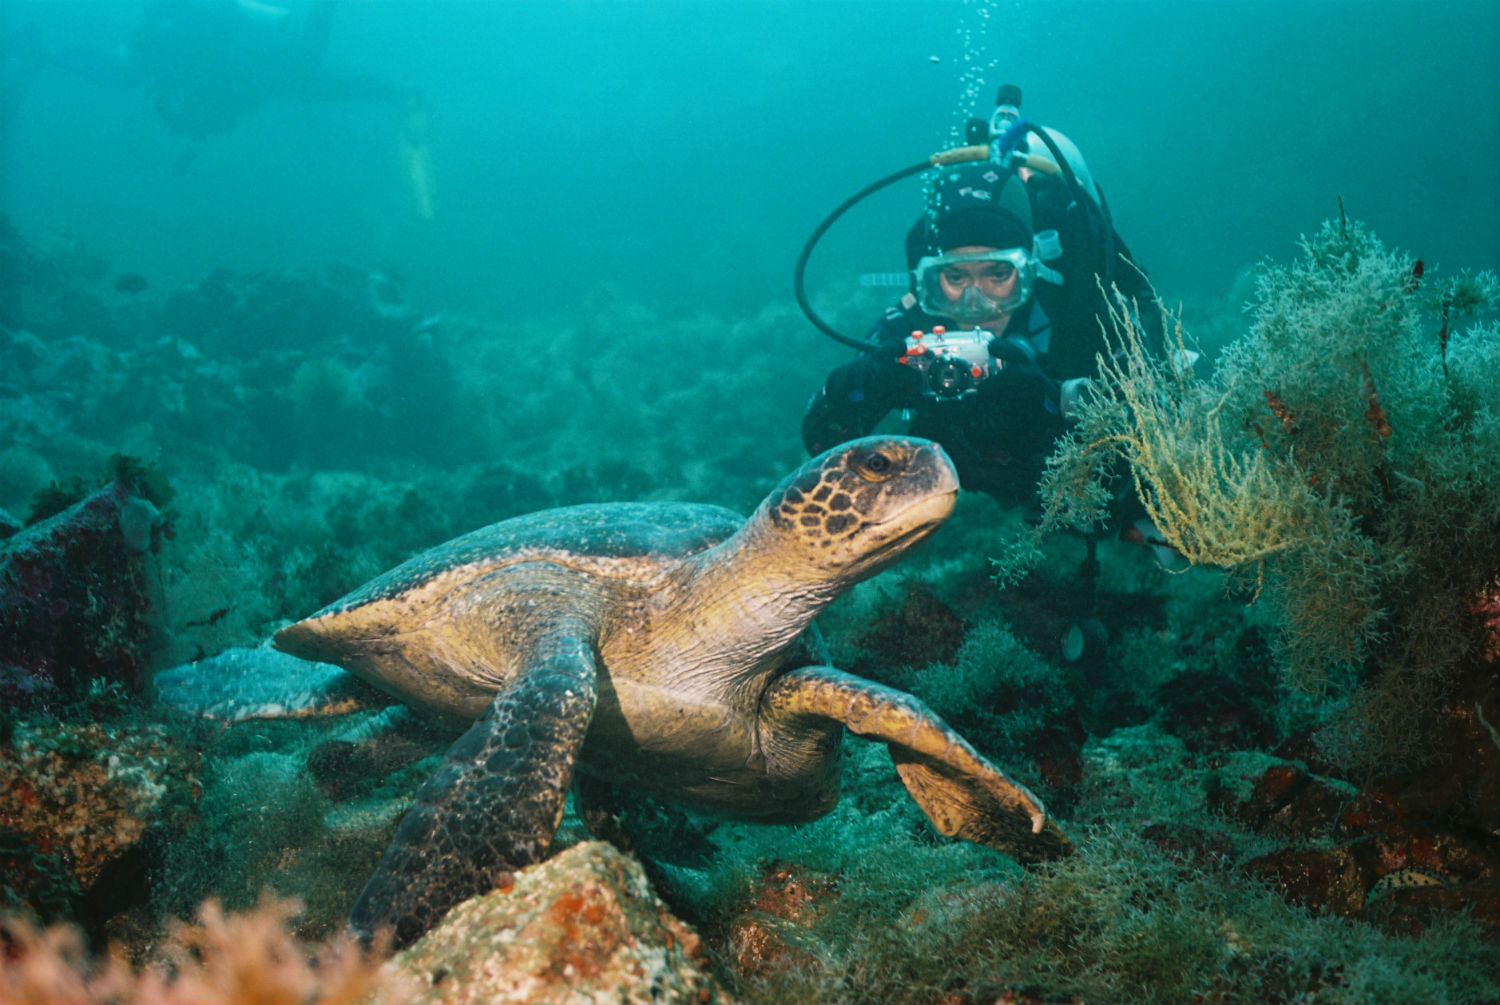 Explore the Galapagos with Ecoventura